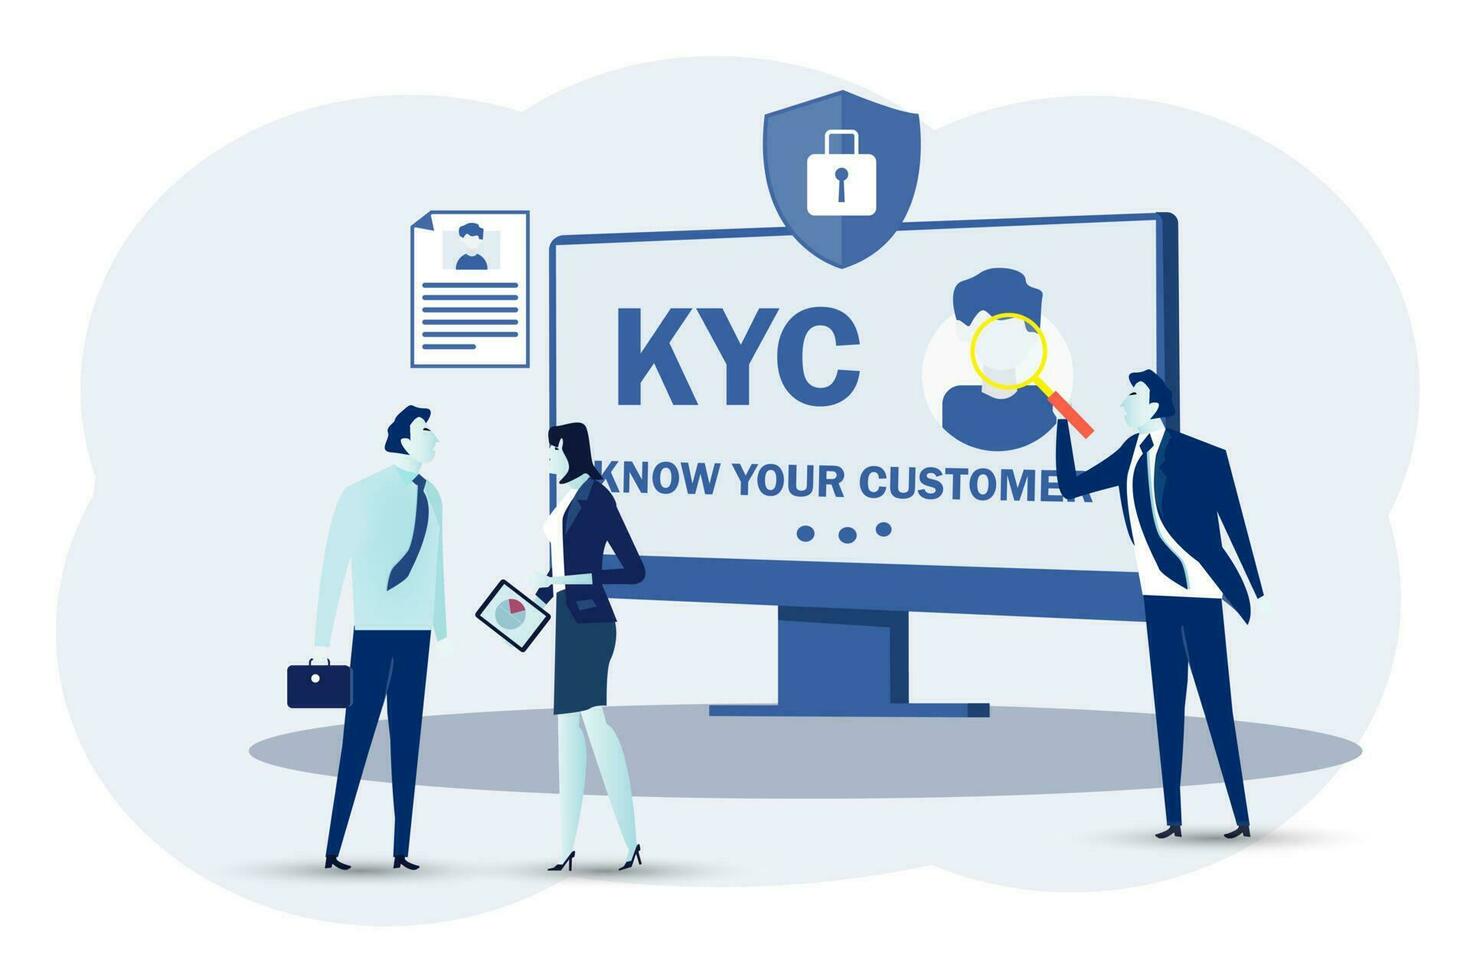 KYC, Know Your Customer Concept, Business Verifying of Clients Identity and Assessing their Suitability, Businesspeople  Learning Customer Profile.Vector Illustration. vector